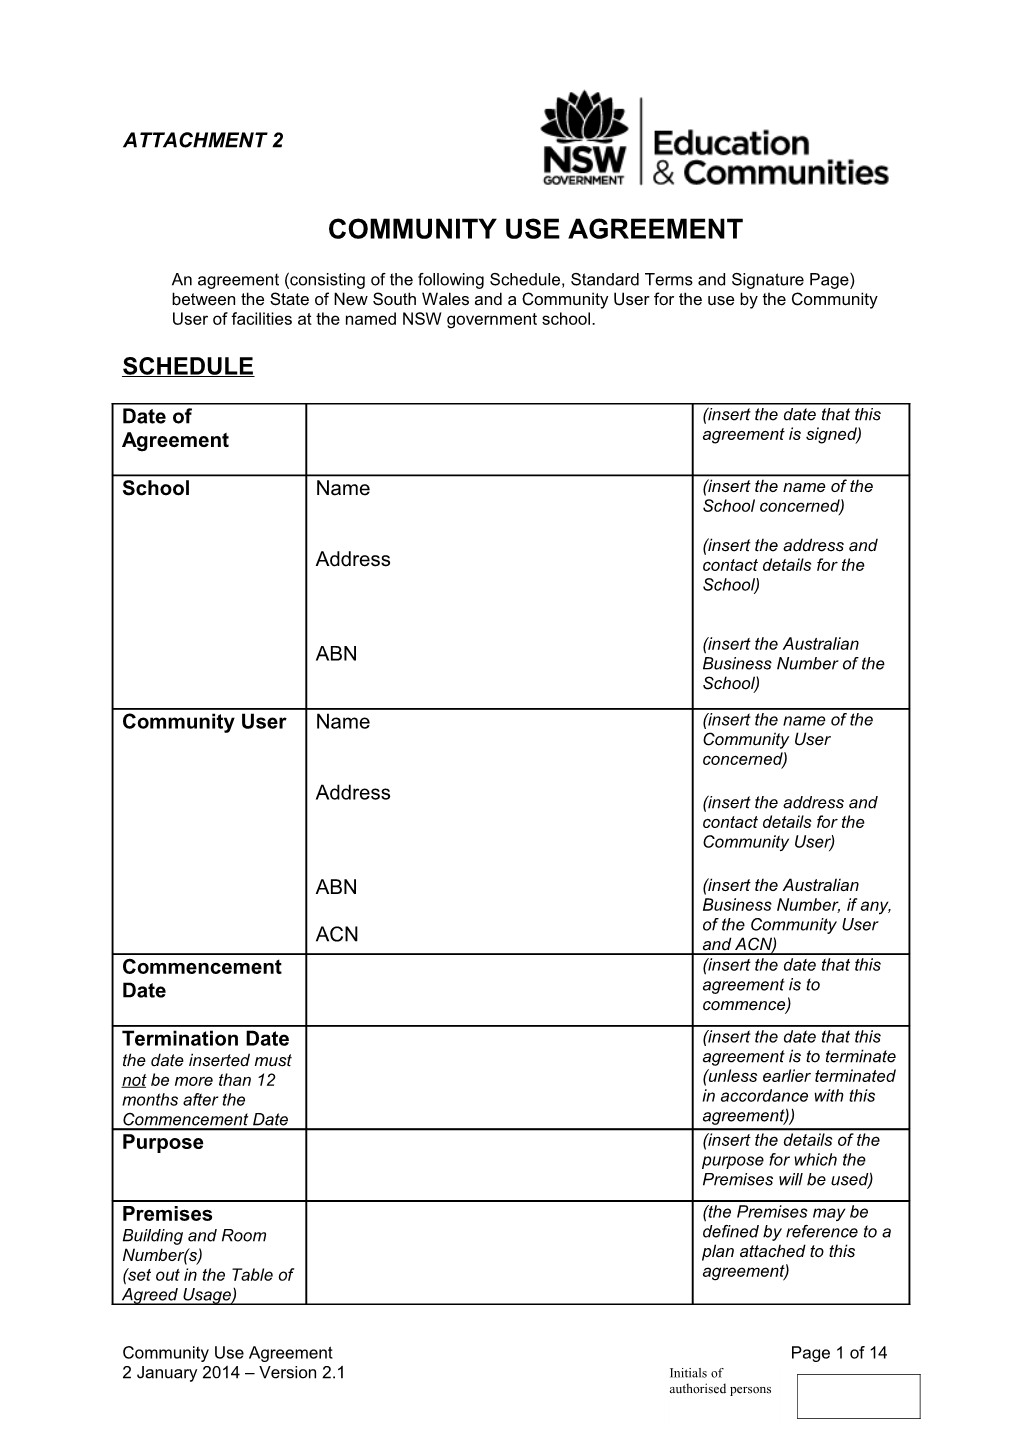 Attachment 2 - Community Use Agreement